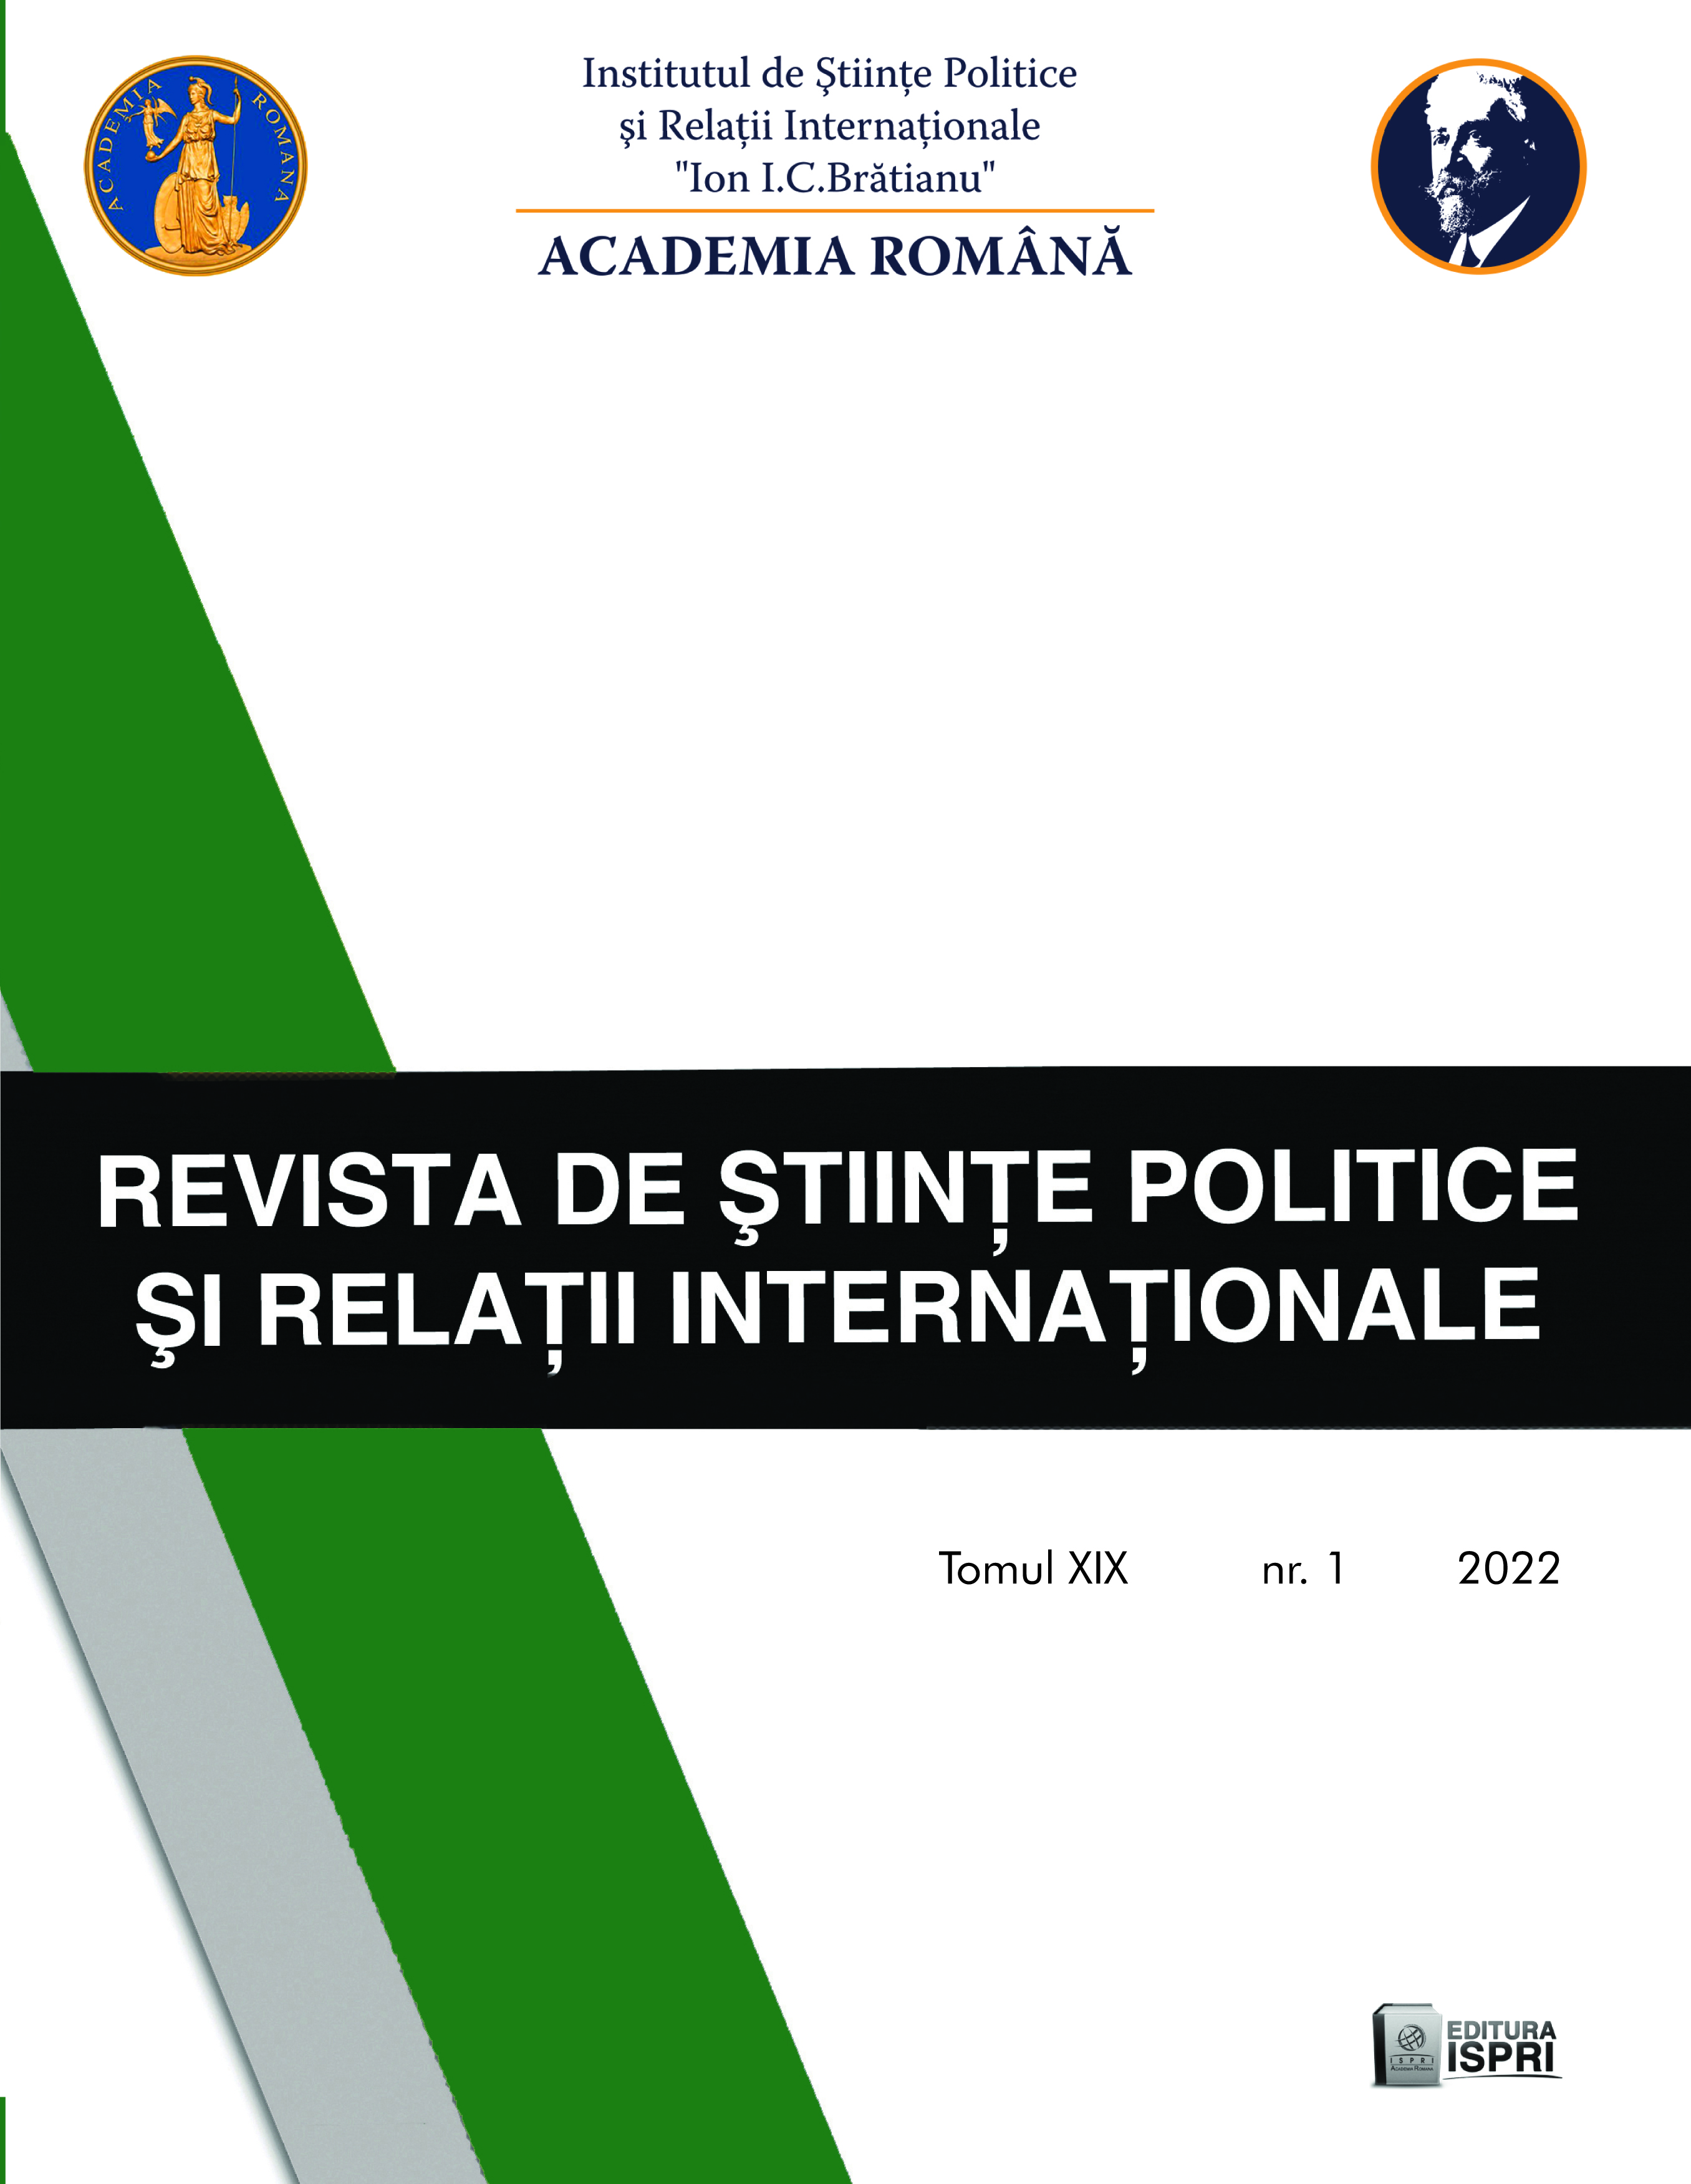 The Thesis of the Convergence between National and Religious Identity after the Atheist Communist Domination. The Romanian and European Perspective Nowadays Cover Image